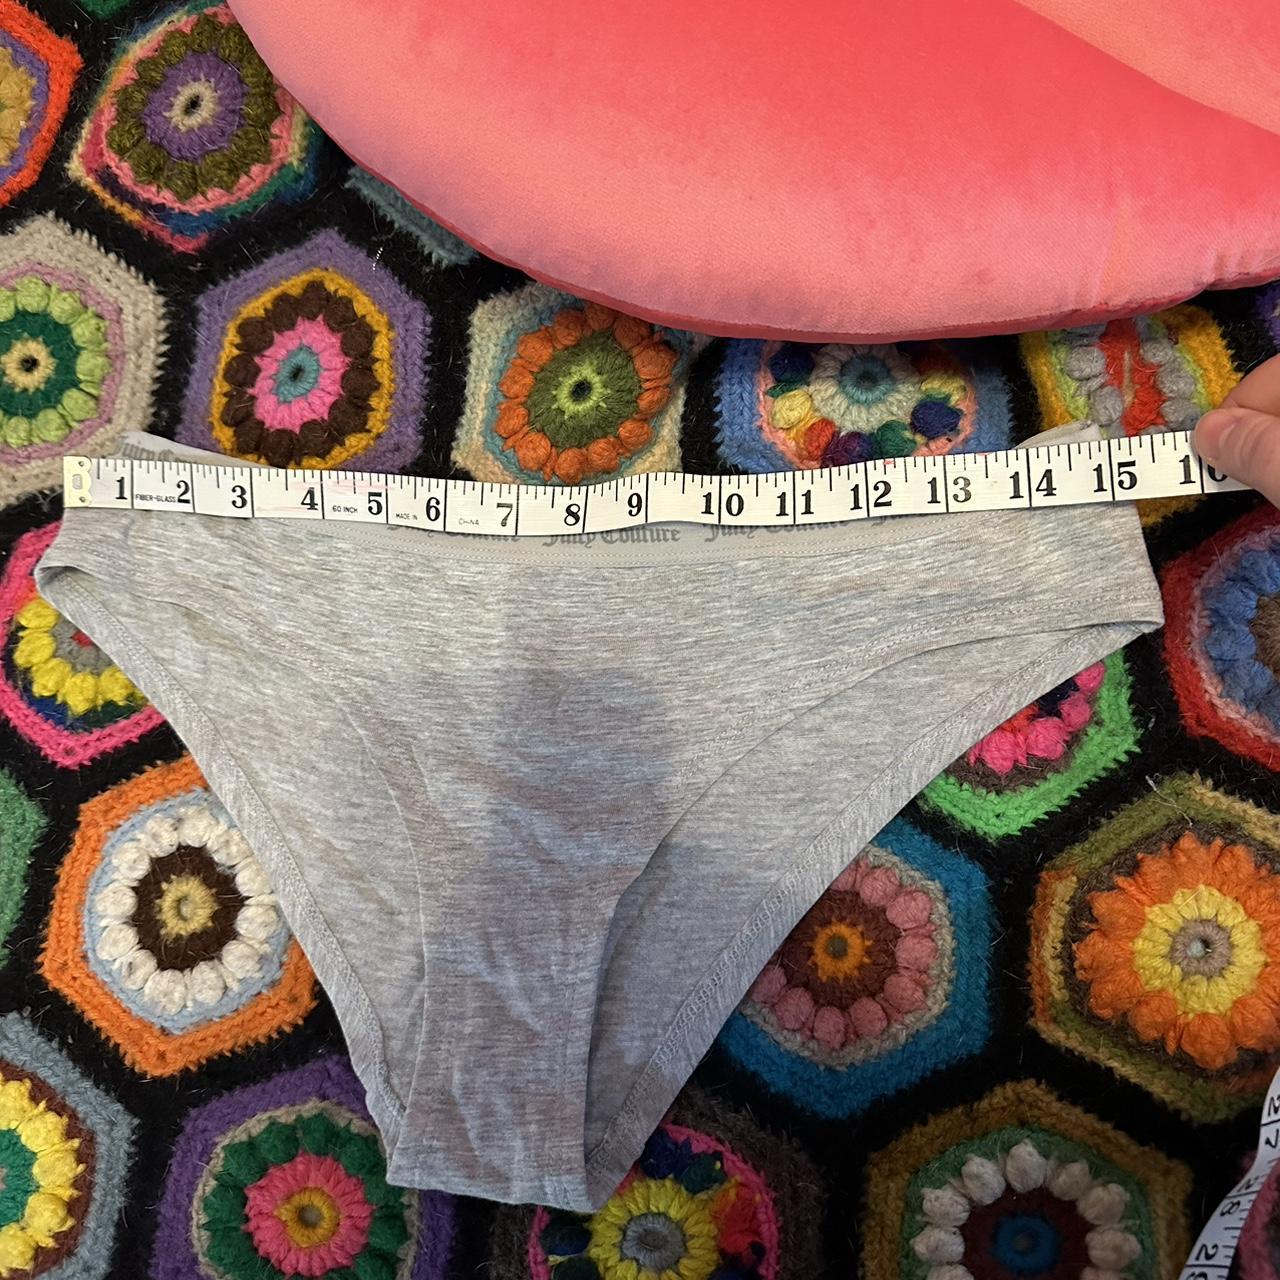 Pink JUICY COUTURE Cotton Logo Thong